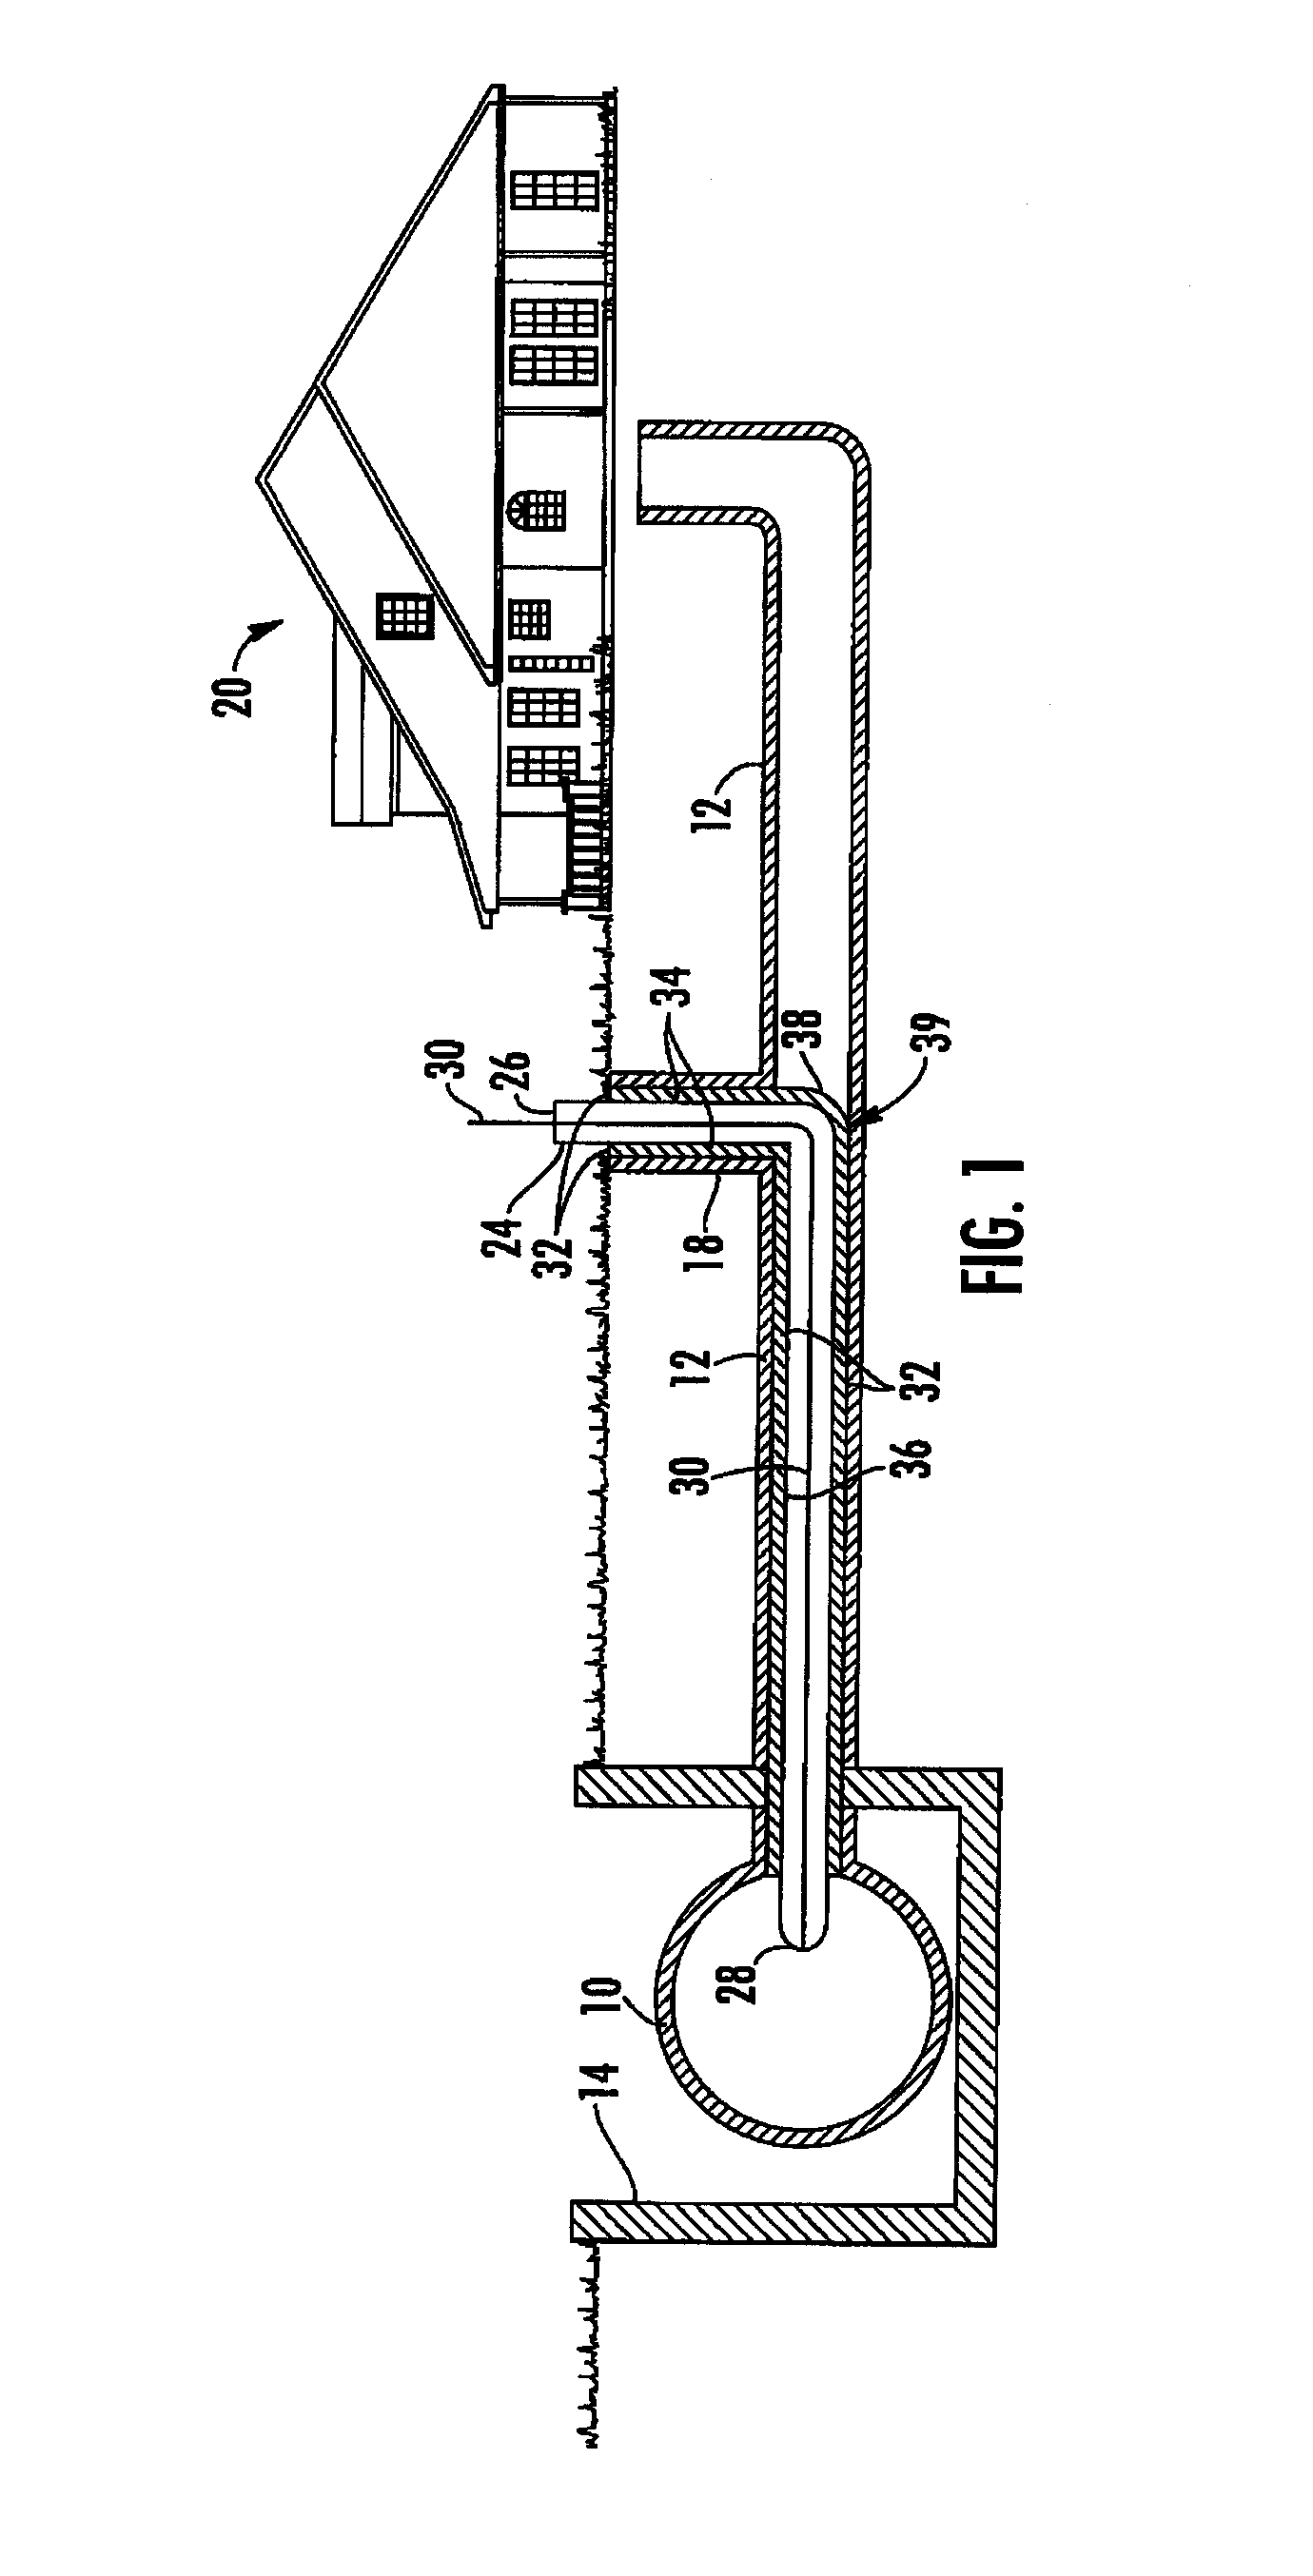 Bladder and method for cured-in-place pipe lining